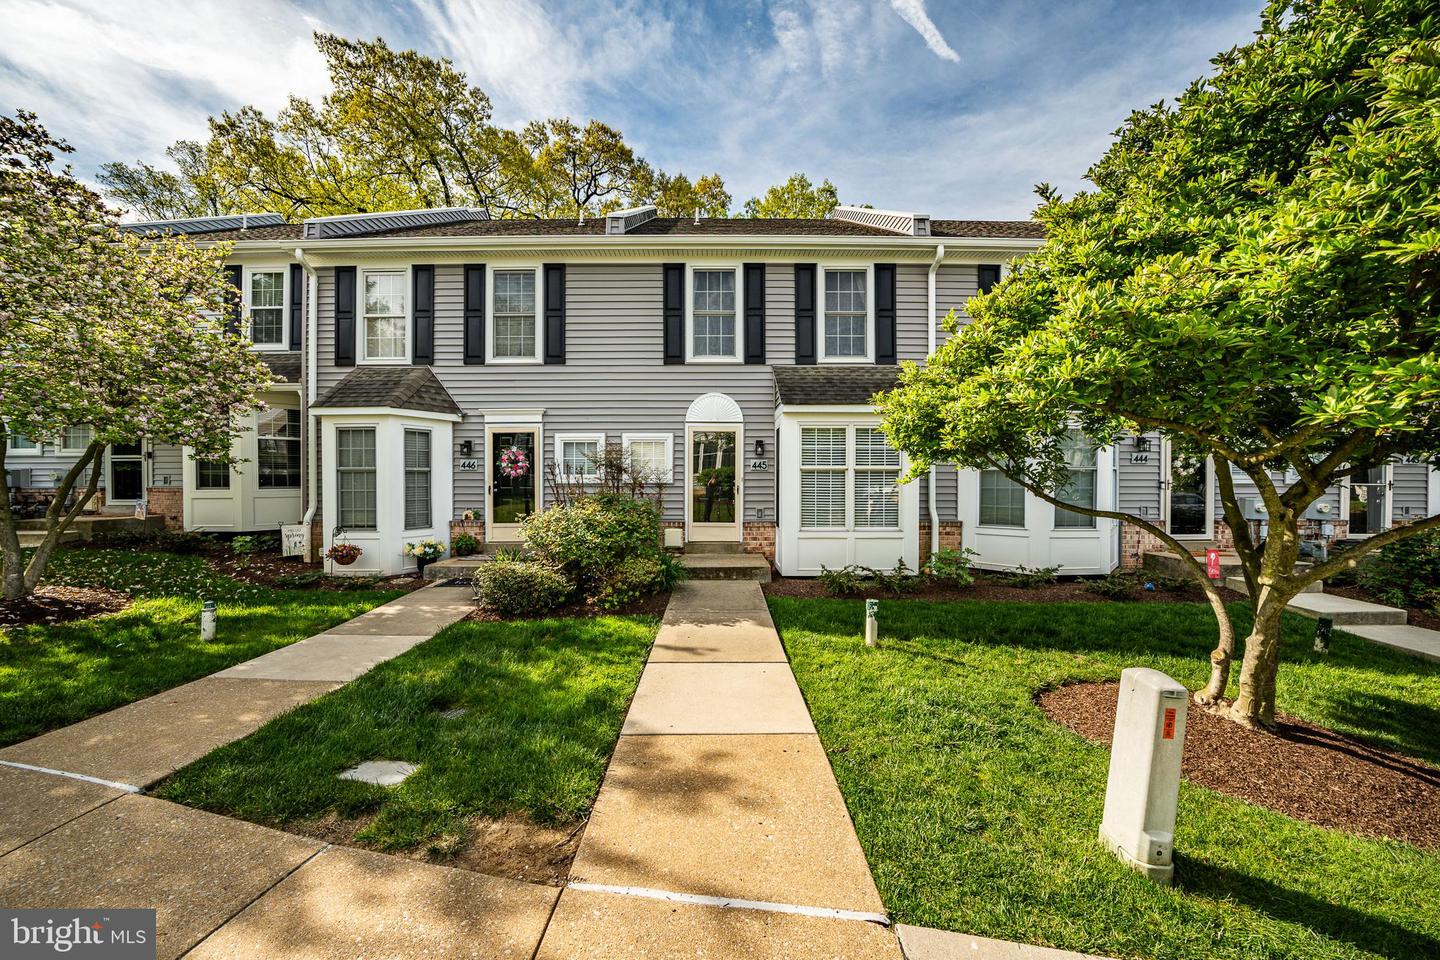 View West Chester, PA 19380 townhome